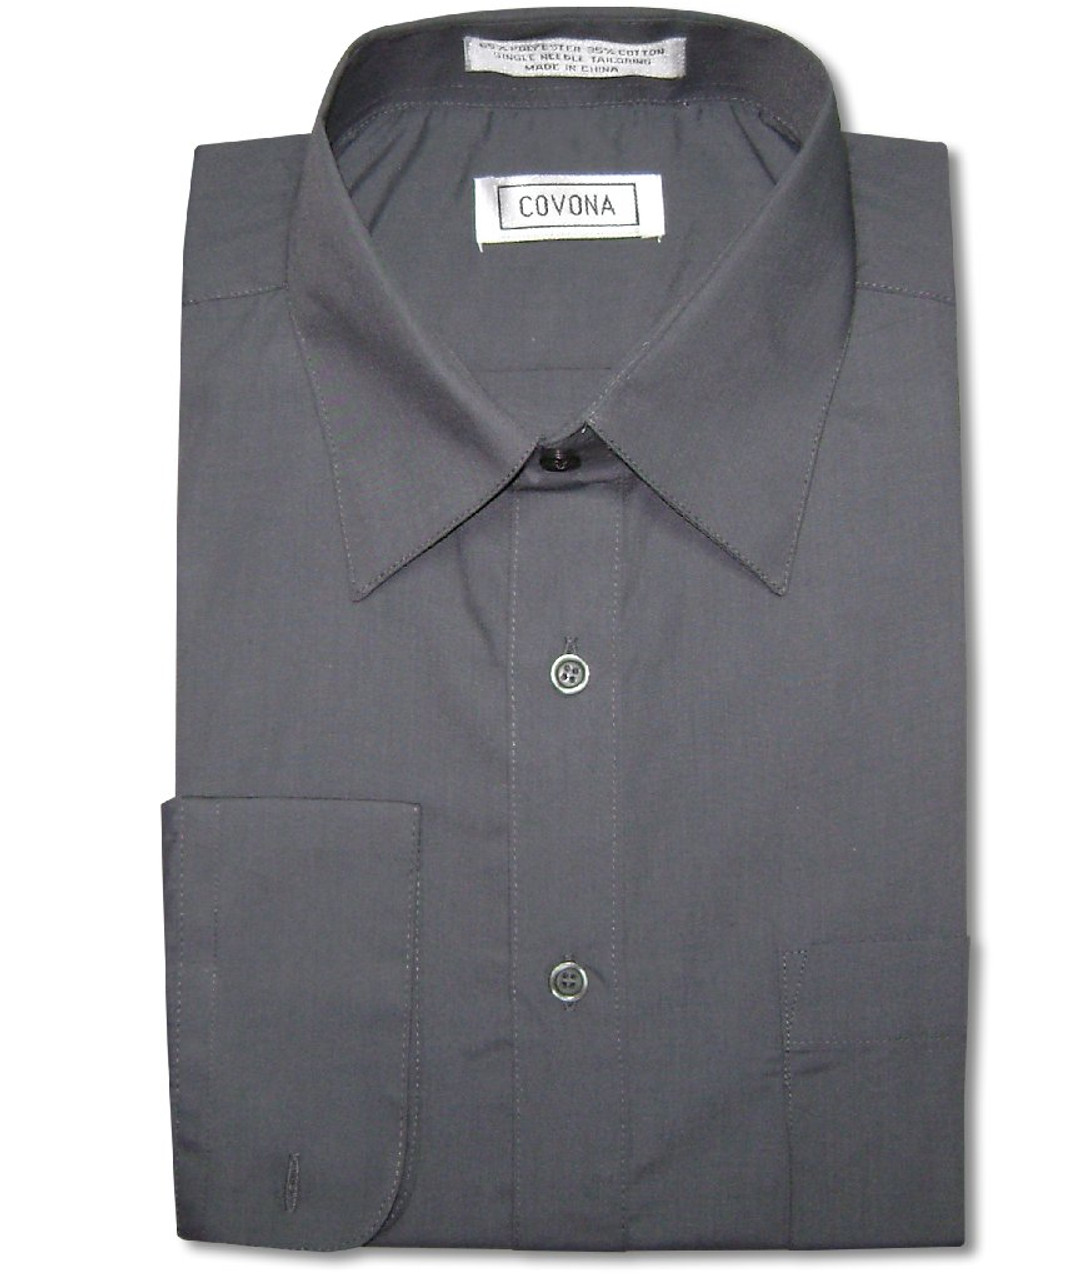 Mens Solid Charcoal Grey Color Dress Shirt with Convertible Cuffs